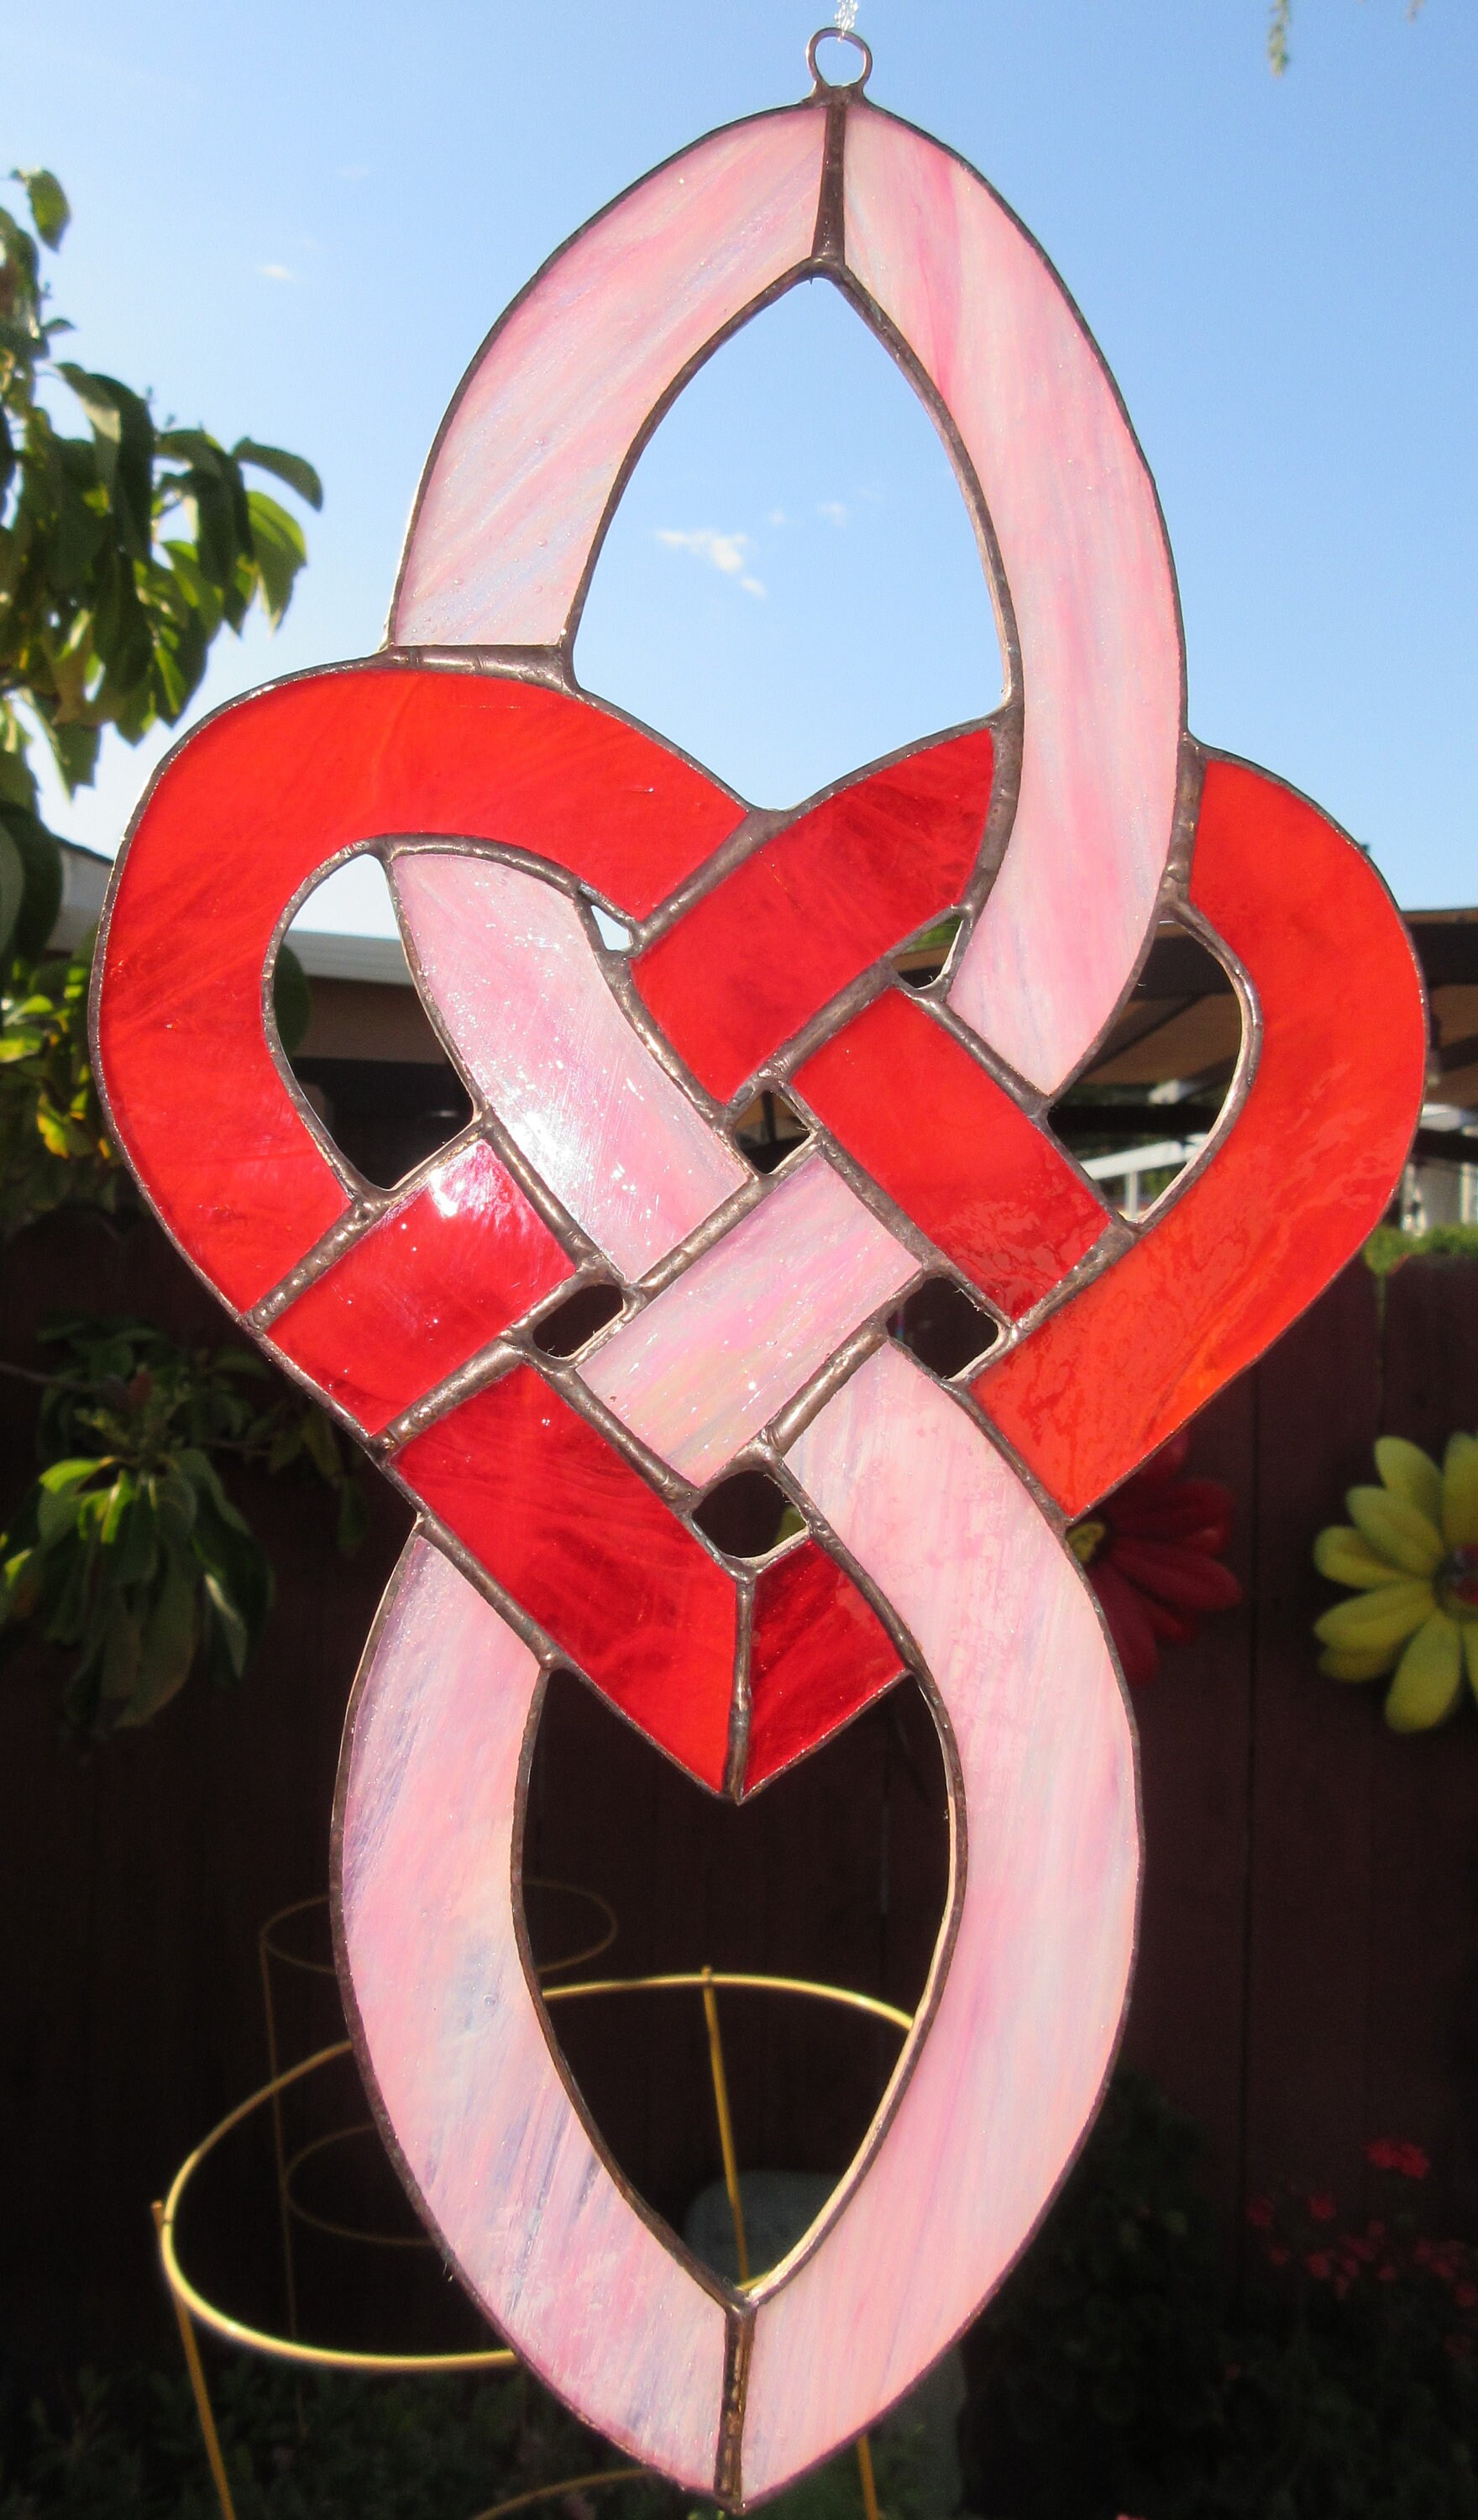 Stained Glass Heart in Dark Red/White Swirl makes perfect lover's gift